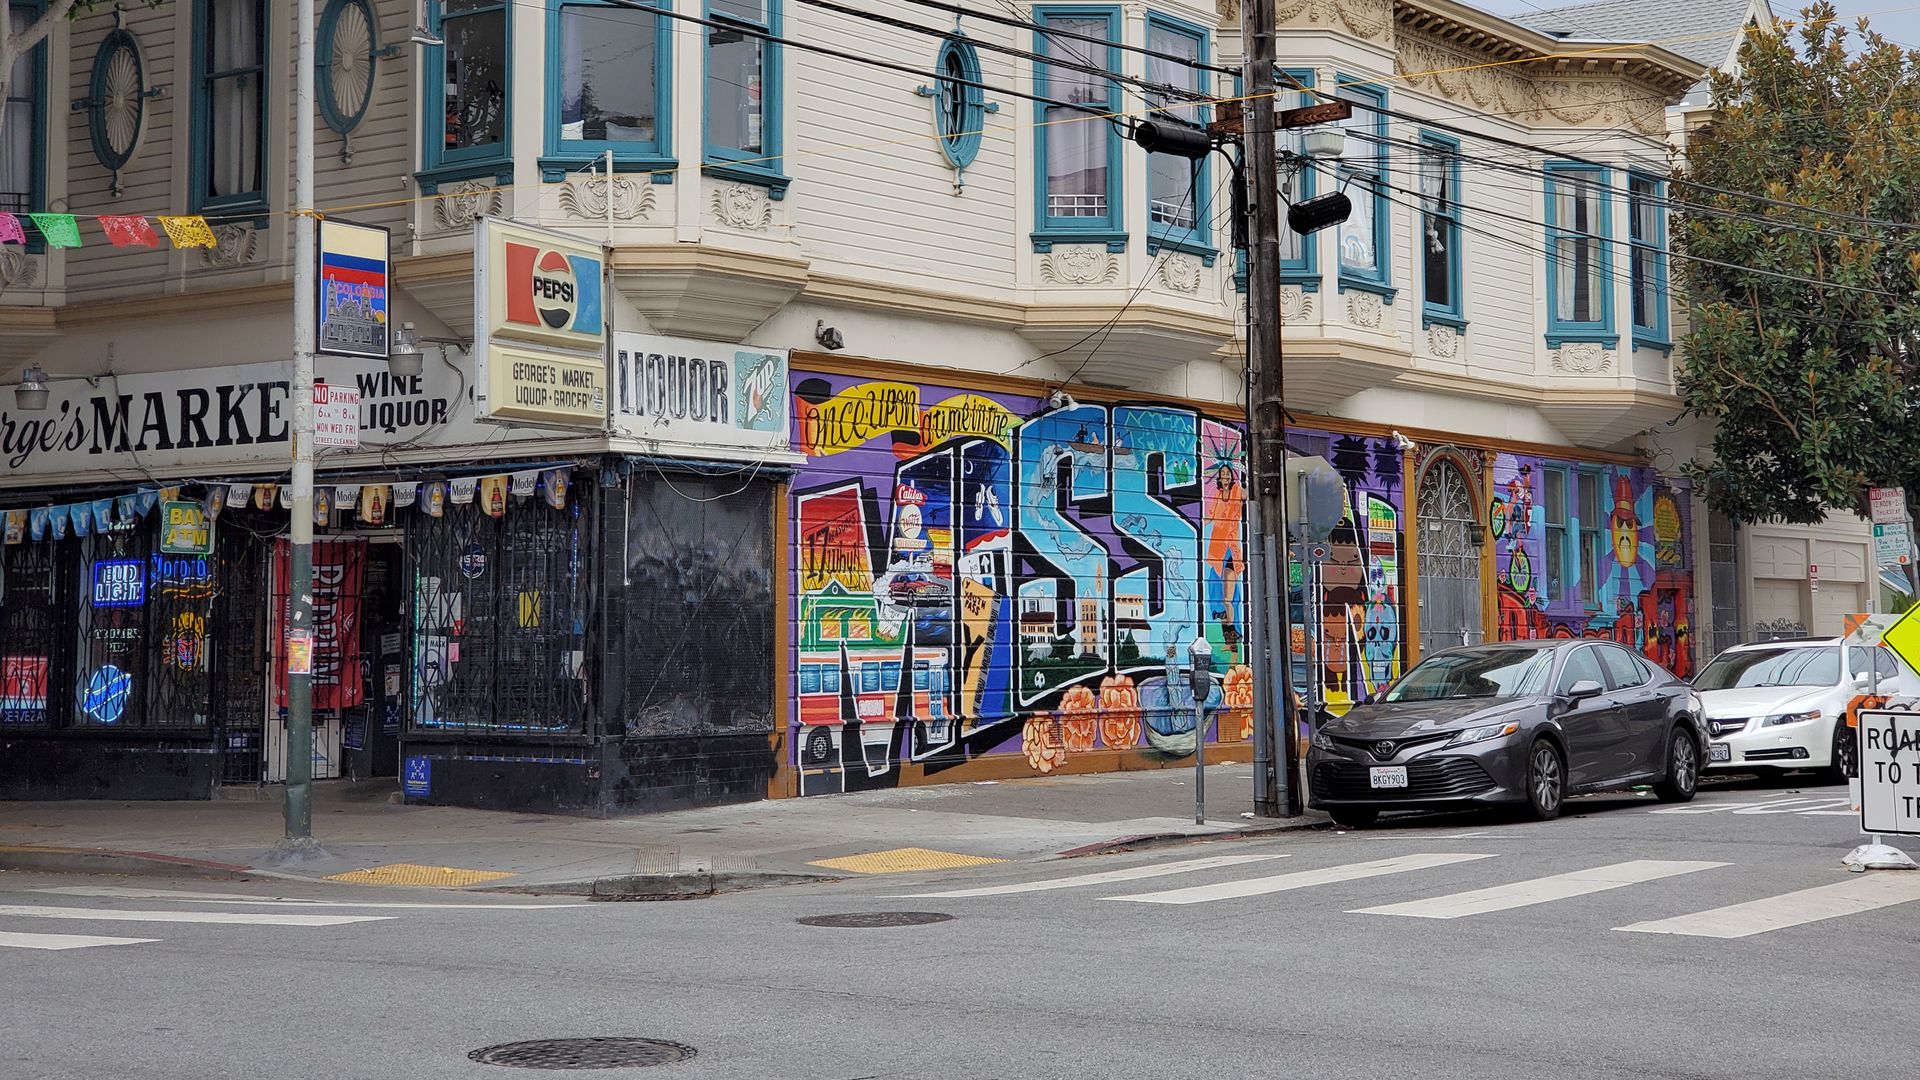 Photo of a street intersection with a colorful mural of the word "Mission"